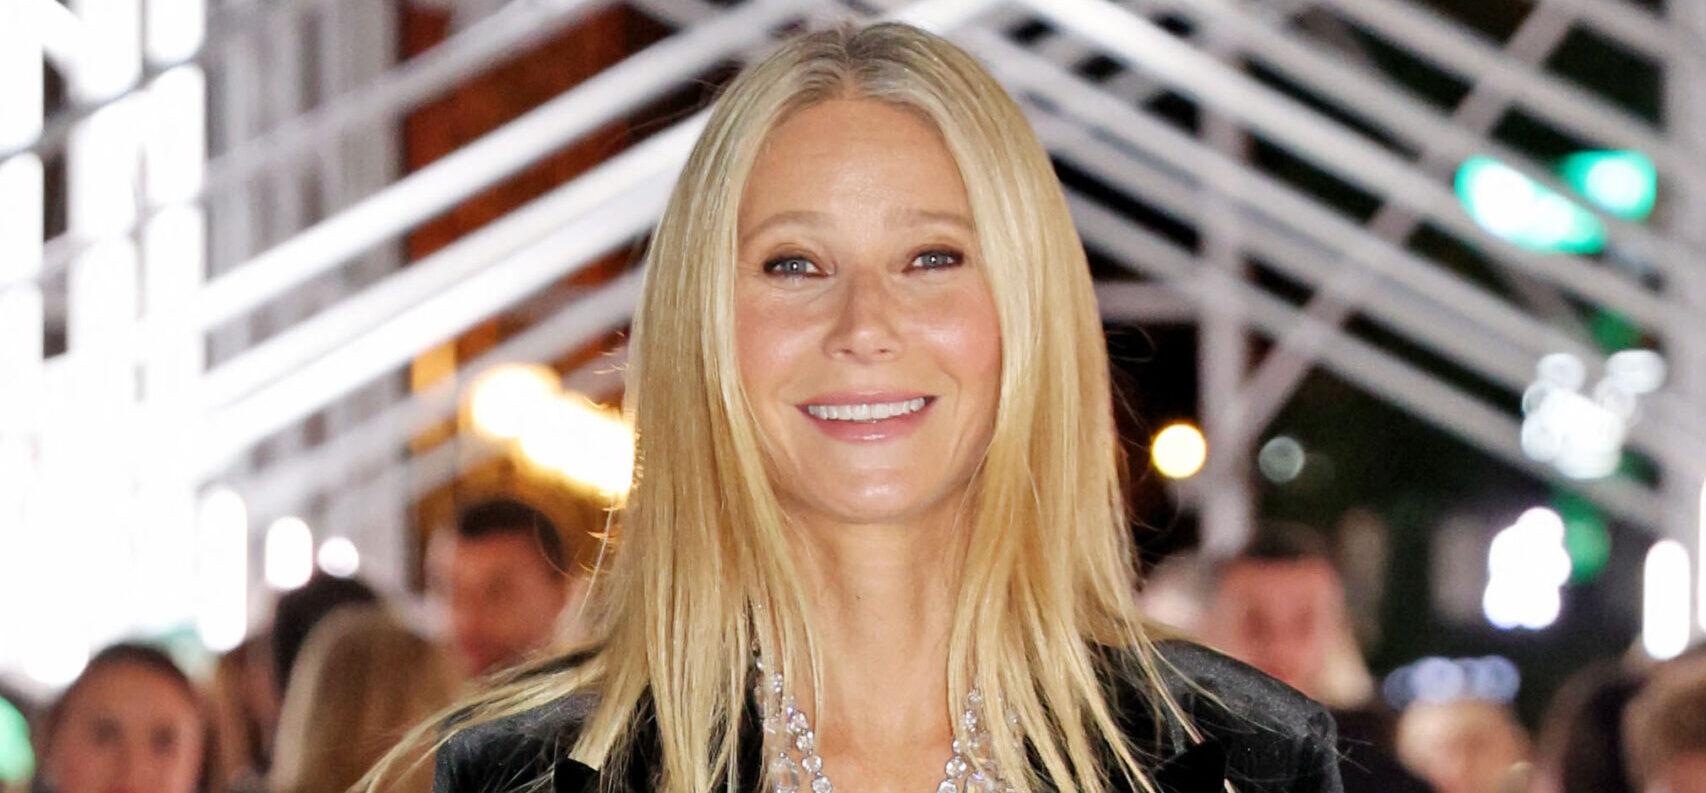 Gwyneth Paltrow Opens Up About Perimenopause: ‘Quite A Roller Coaster’